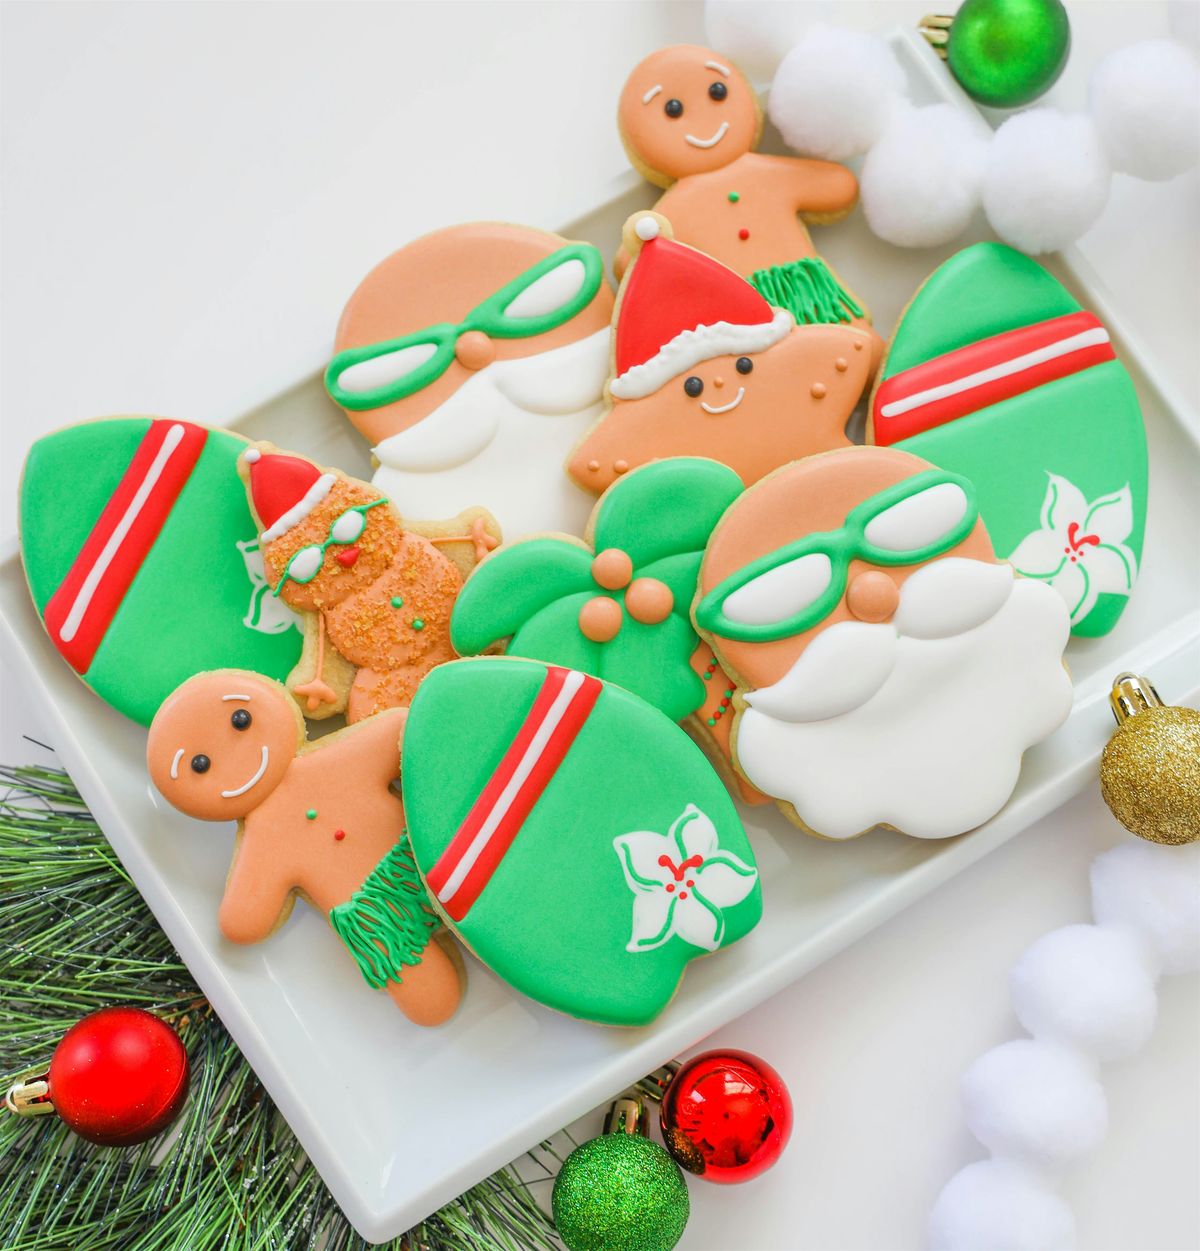 Surfs up! It\u2019s Christmas in July Cookie Decorating Class